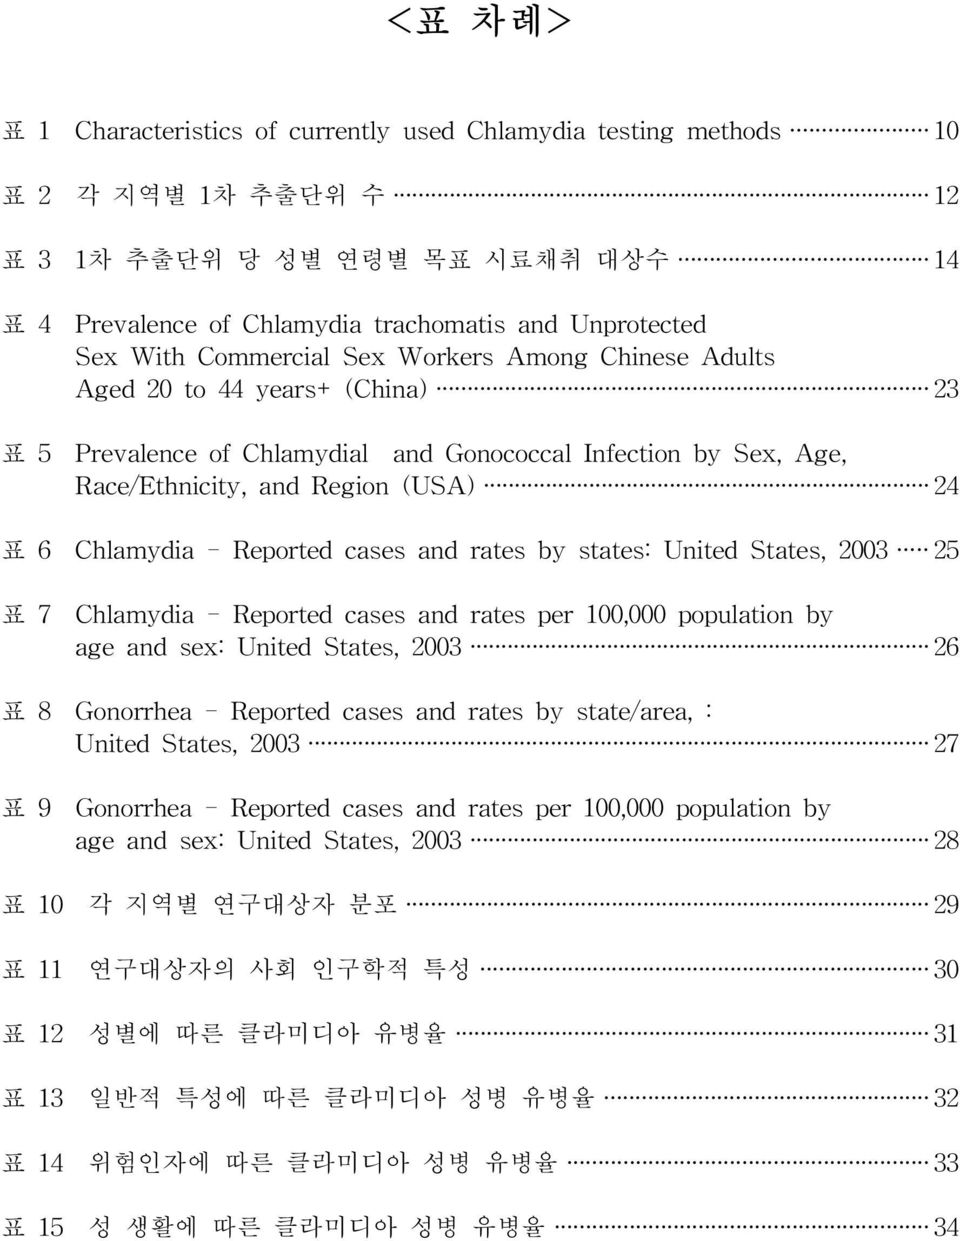 U S A ) 2 4 표 6 Chlamydia - Reported cases and rates by states: United States, 2003 25 표 7 Chlamydia - Reported cases and rates per 100,000 population by age and sex: United States, 2003 2 6 표 8